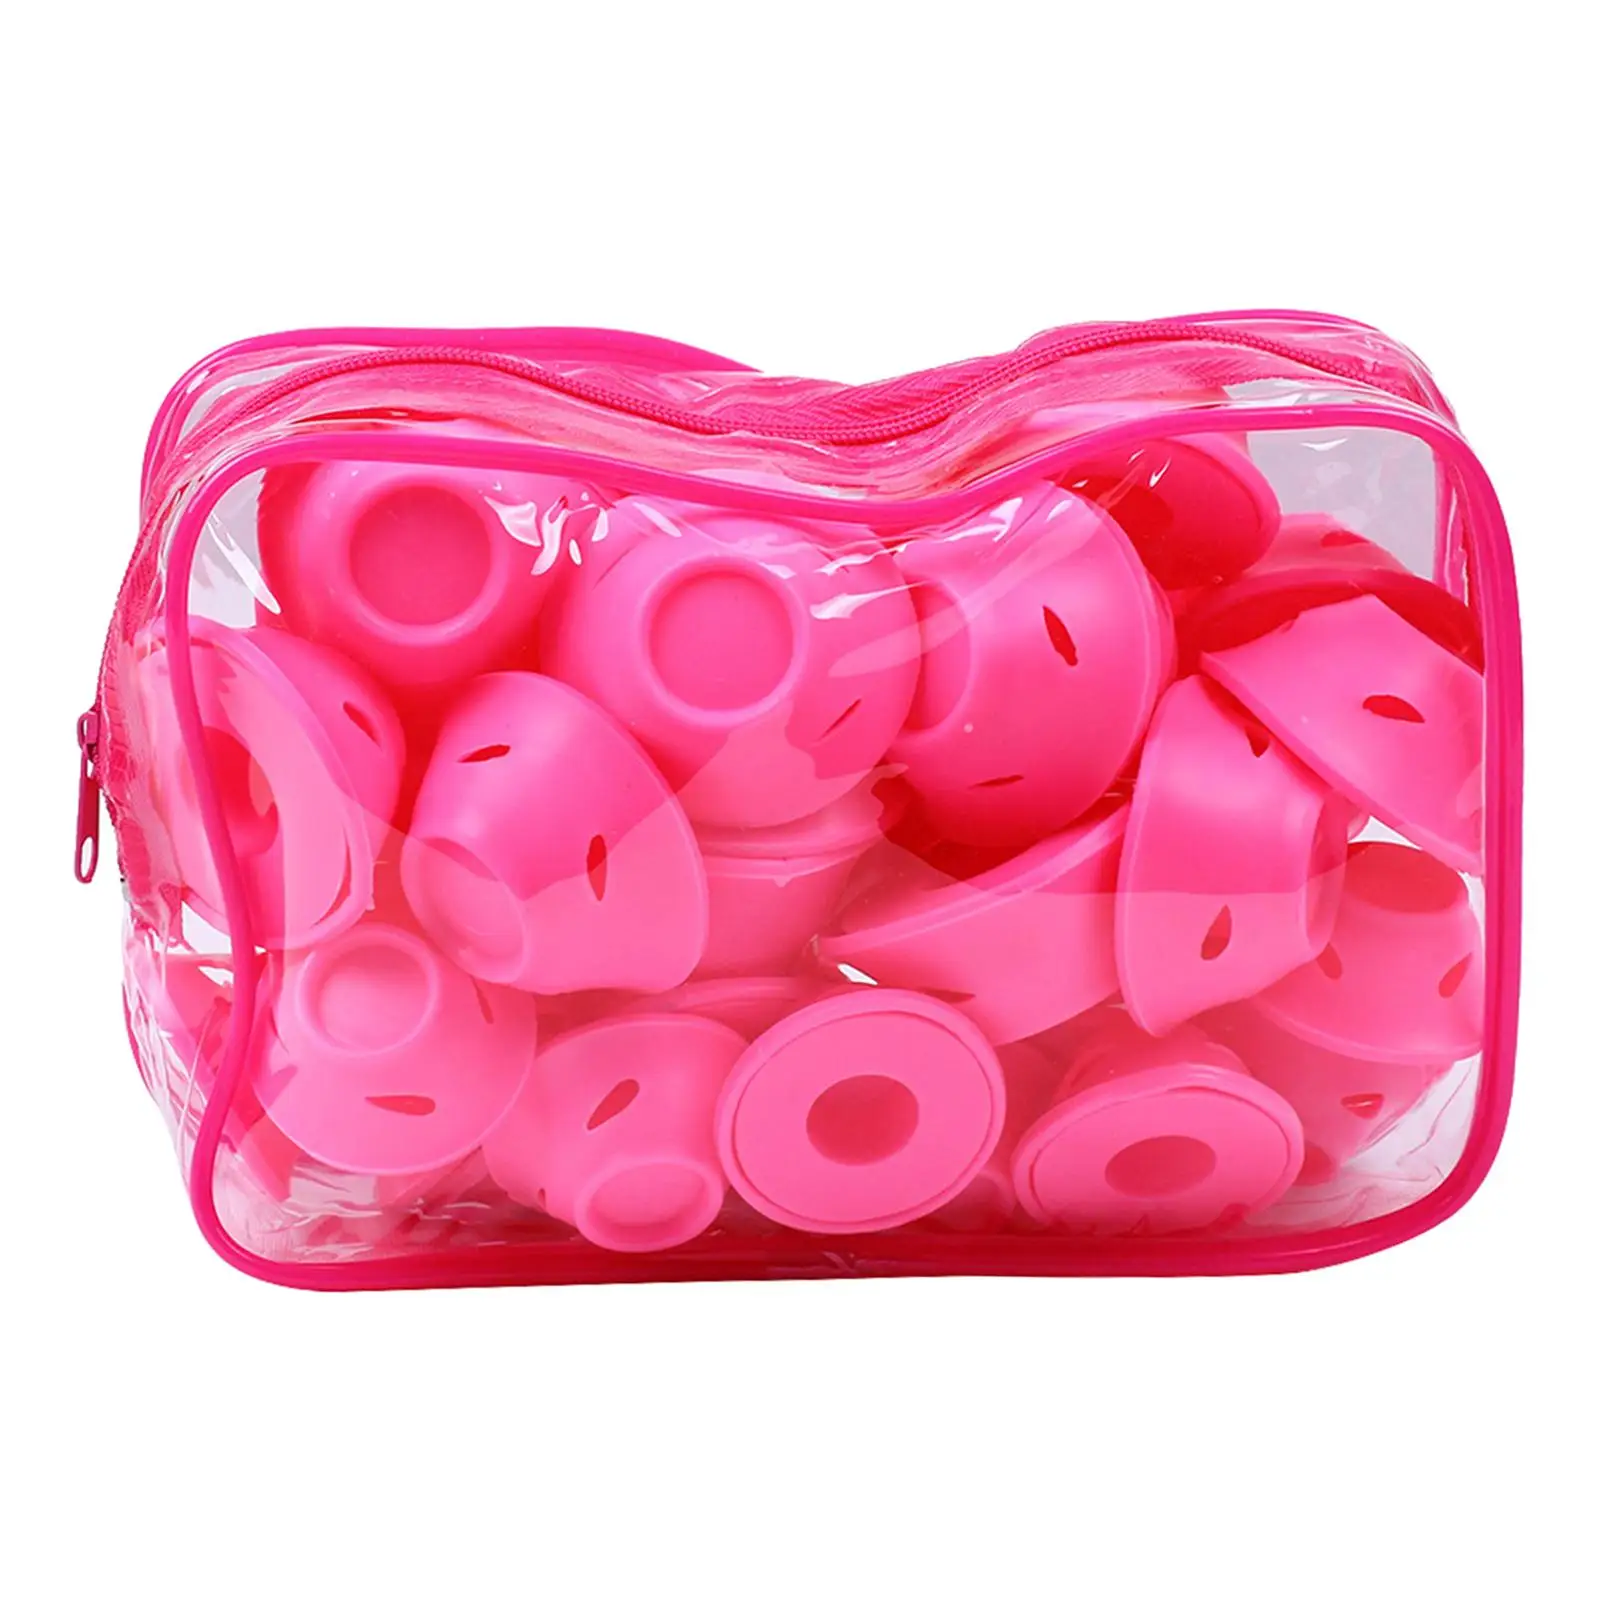 Set of 30 Hair Rollers Soft Hair Accessories Silicone Mushroom Design Curling for Women Girl